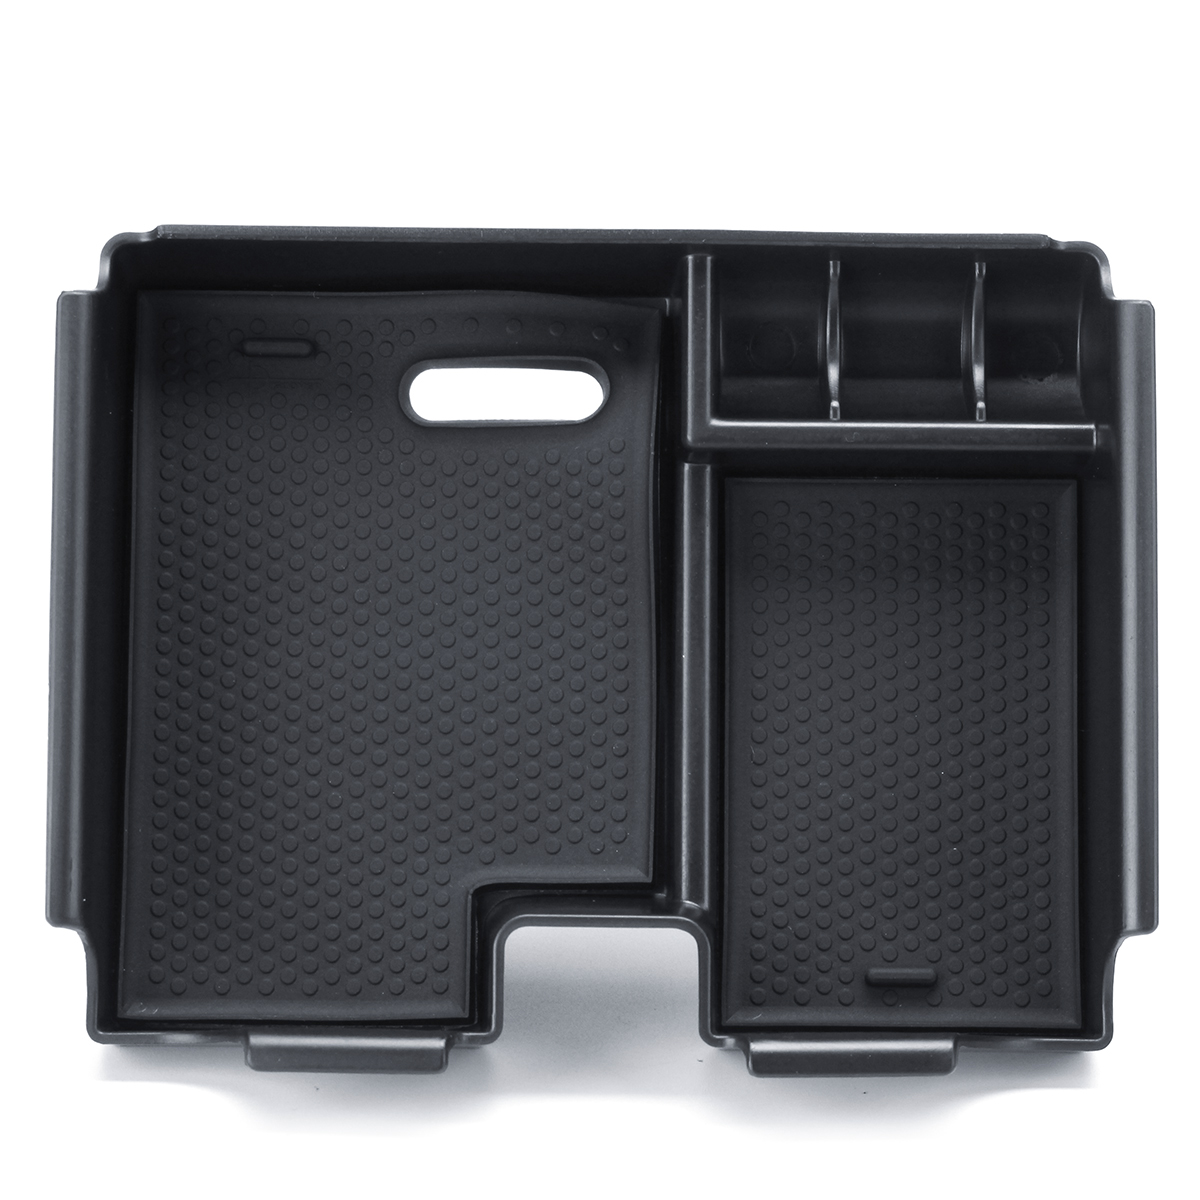 

Car Central Console Armrest Storage Box Arm Rest Tray Container Holder for Range Rover Evoque 2014-2